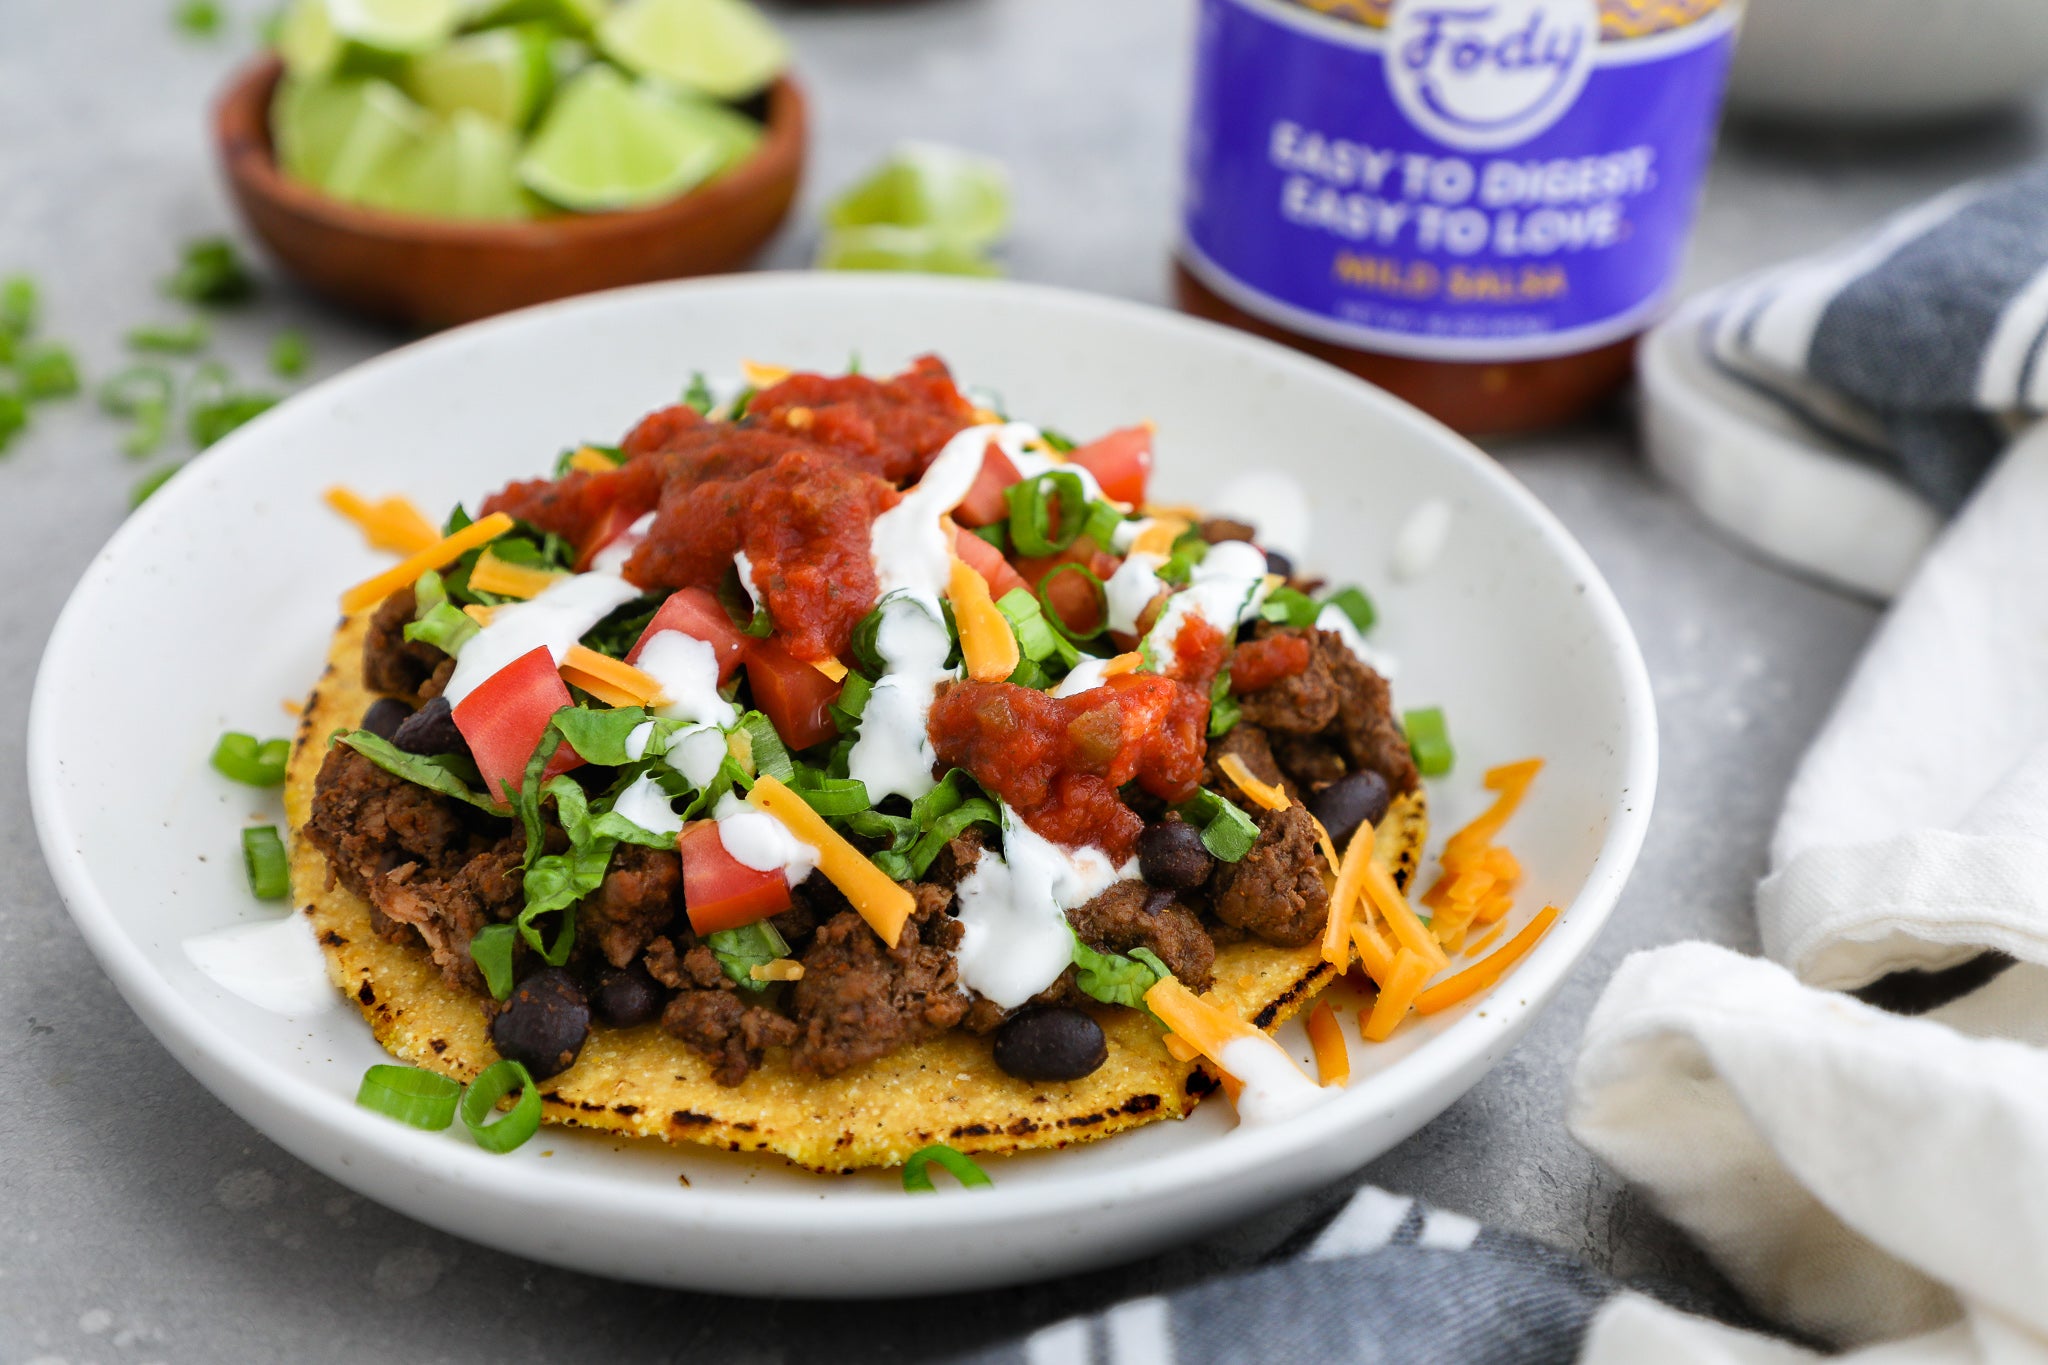 Fody's Homemade Loaded Ground Beef Tostadas – FODY Food Co. - USA